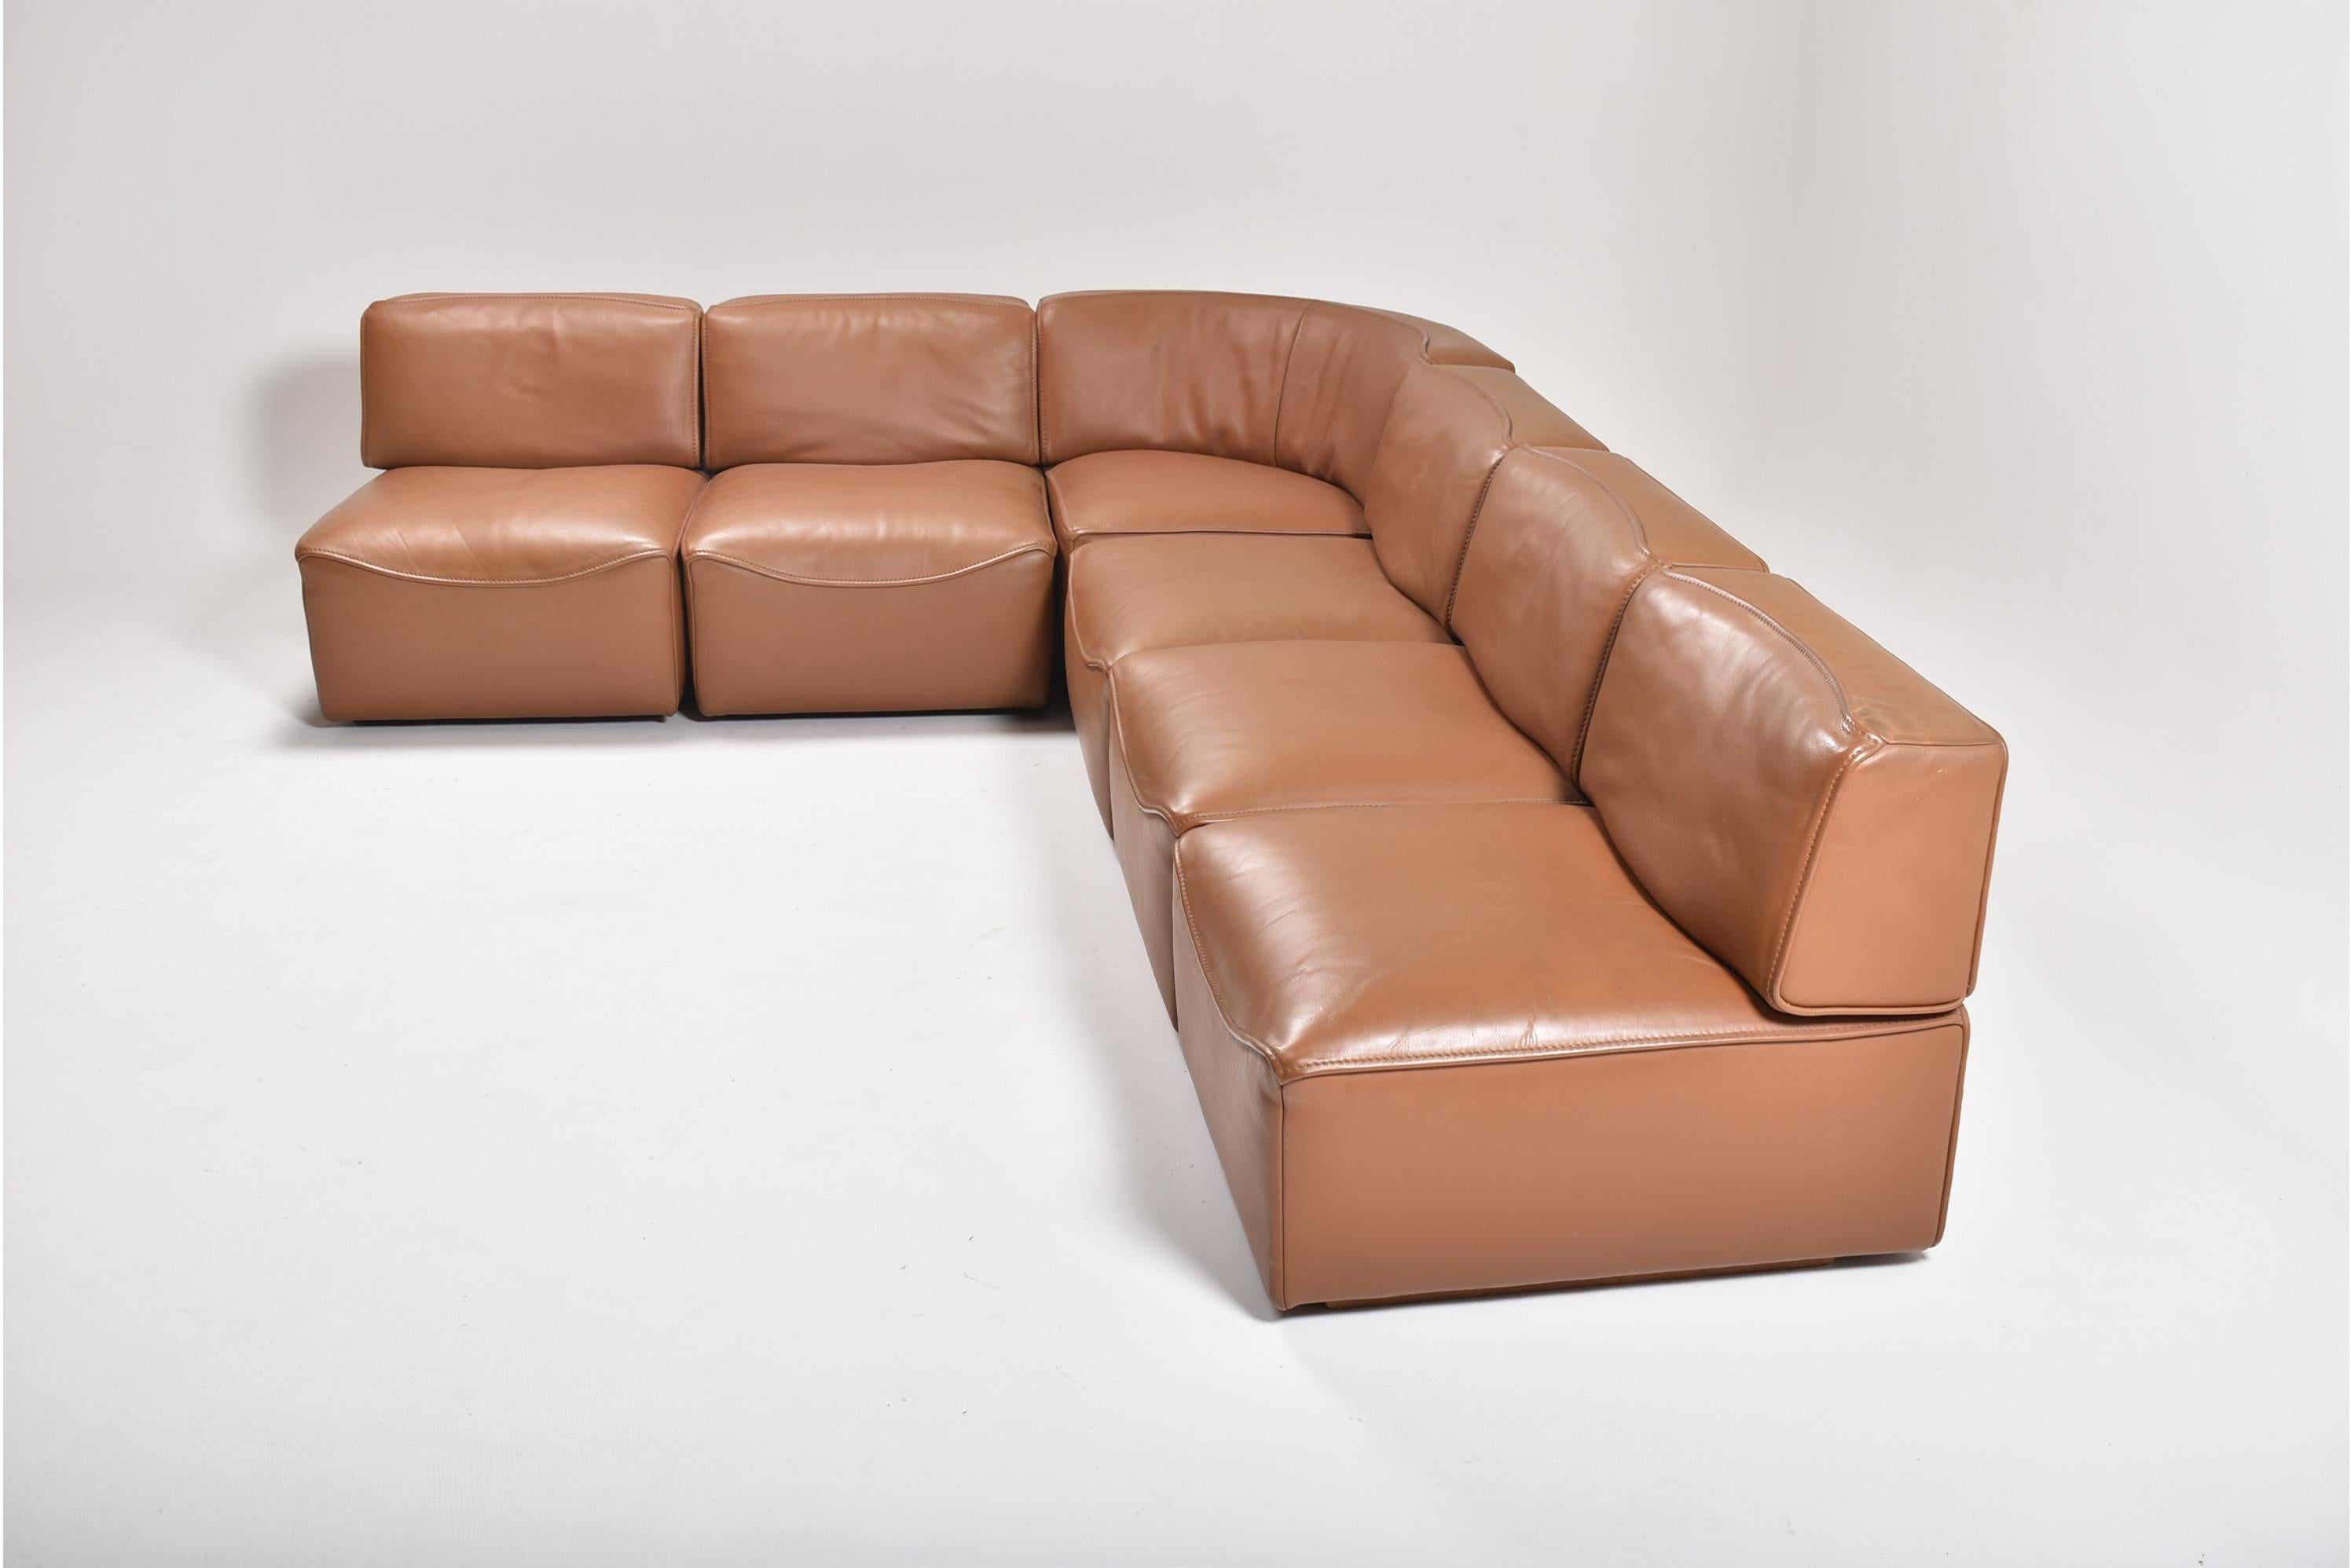 De Sede, sectional sofa model DS-15, leather, Switzerland, 1970s.
De Sede is well known for using only high quality materials, especially leather.
This sofa is made of five straight elements and one corner, allowing free placement of the elements.